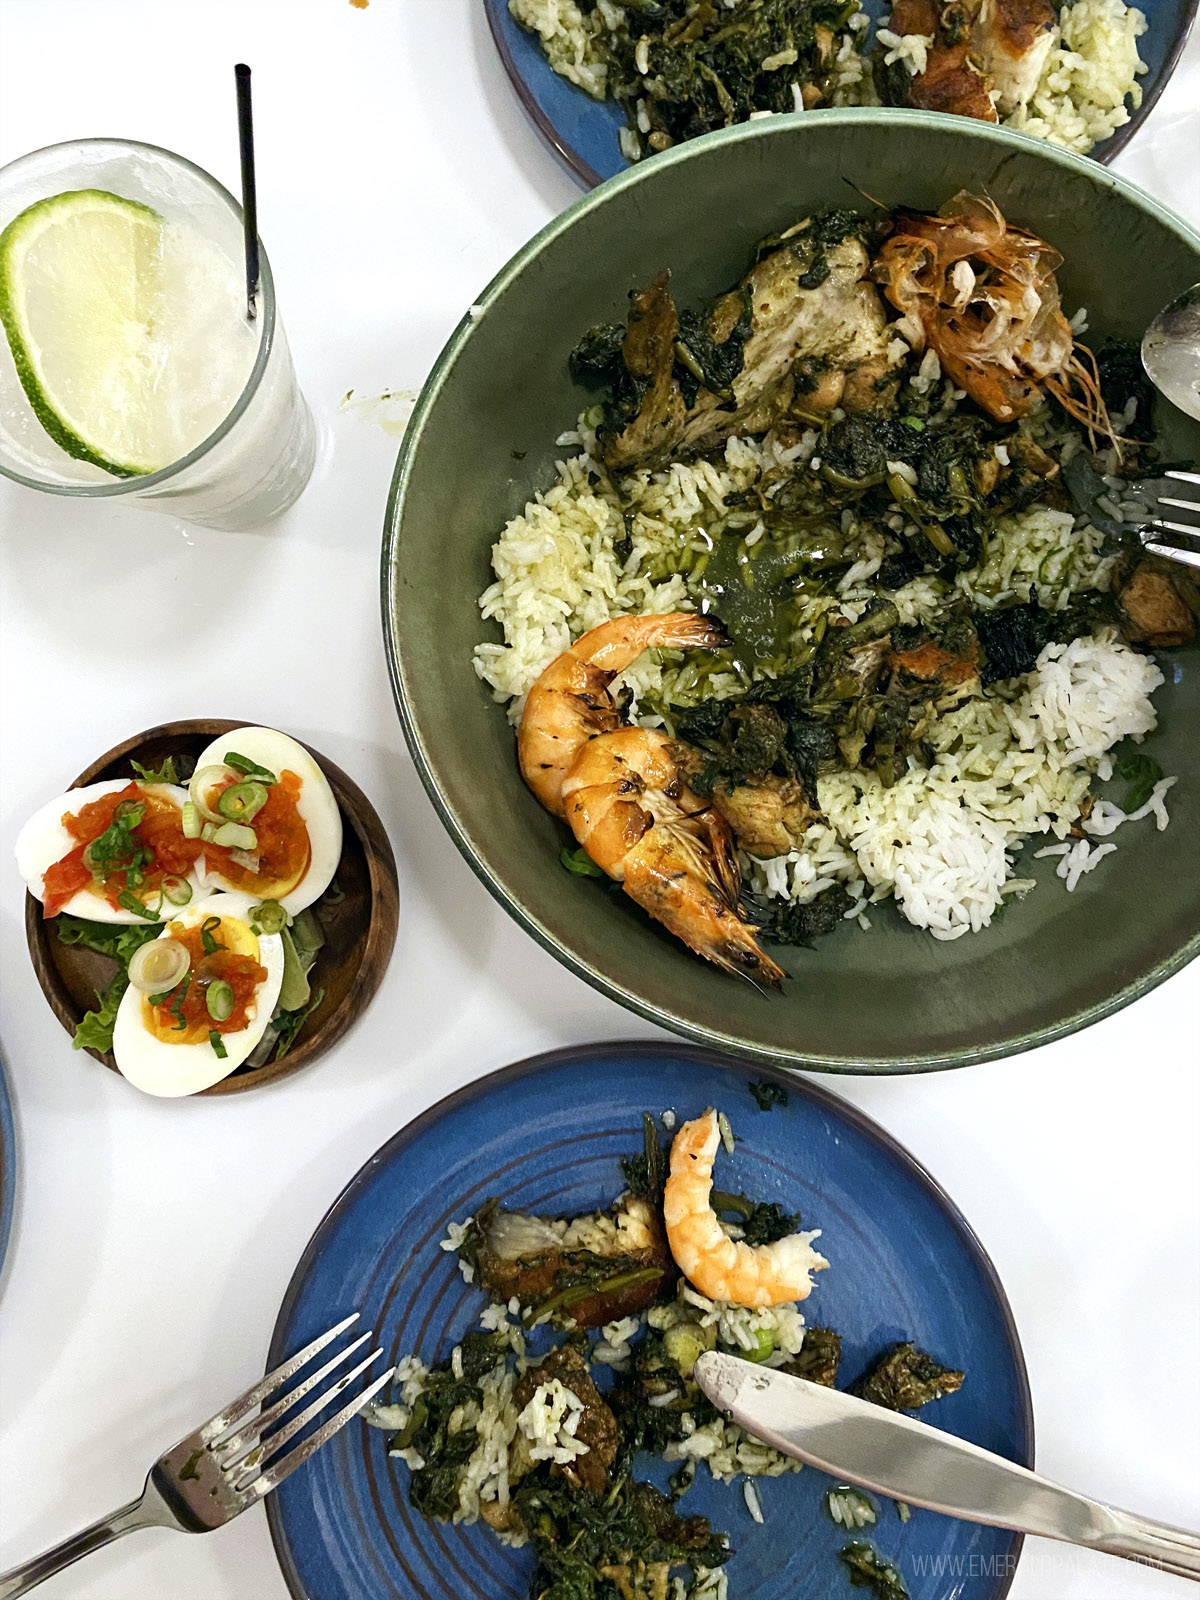 gold coast ghal kitchen, one of the best Black owned restaurants in Seattle